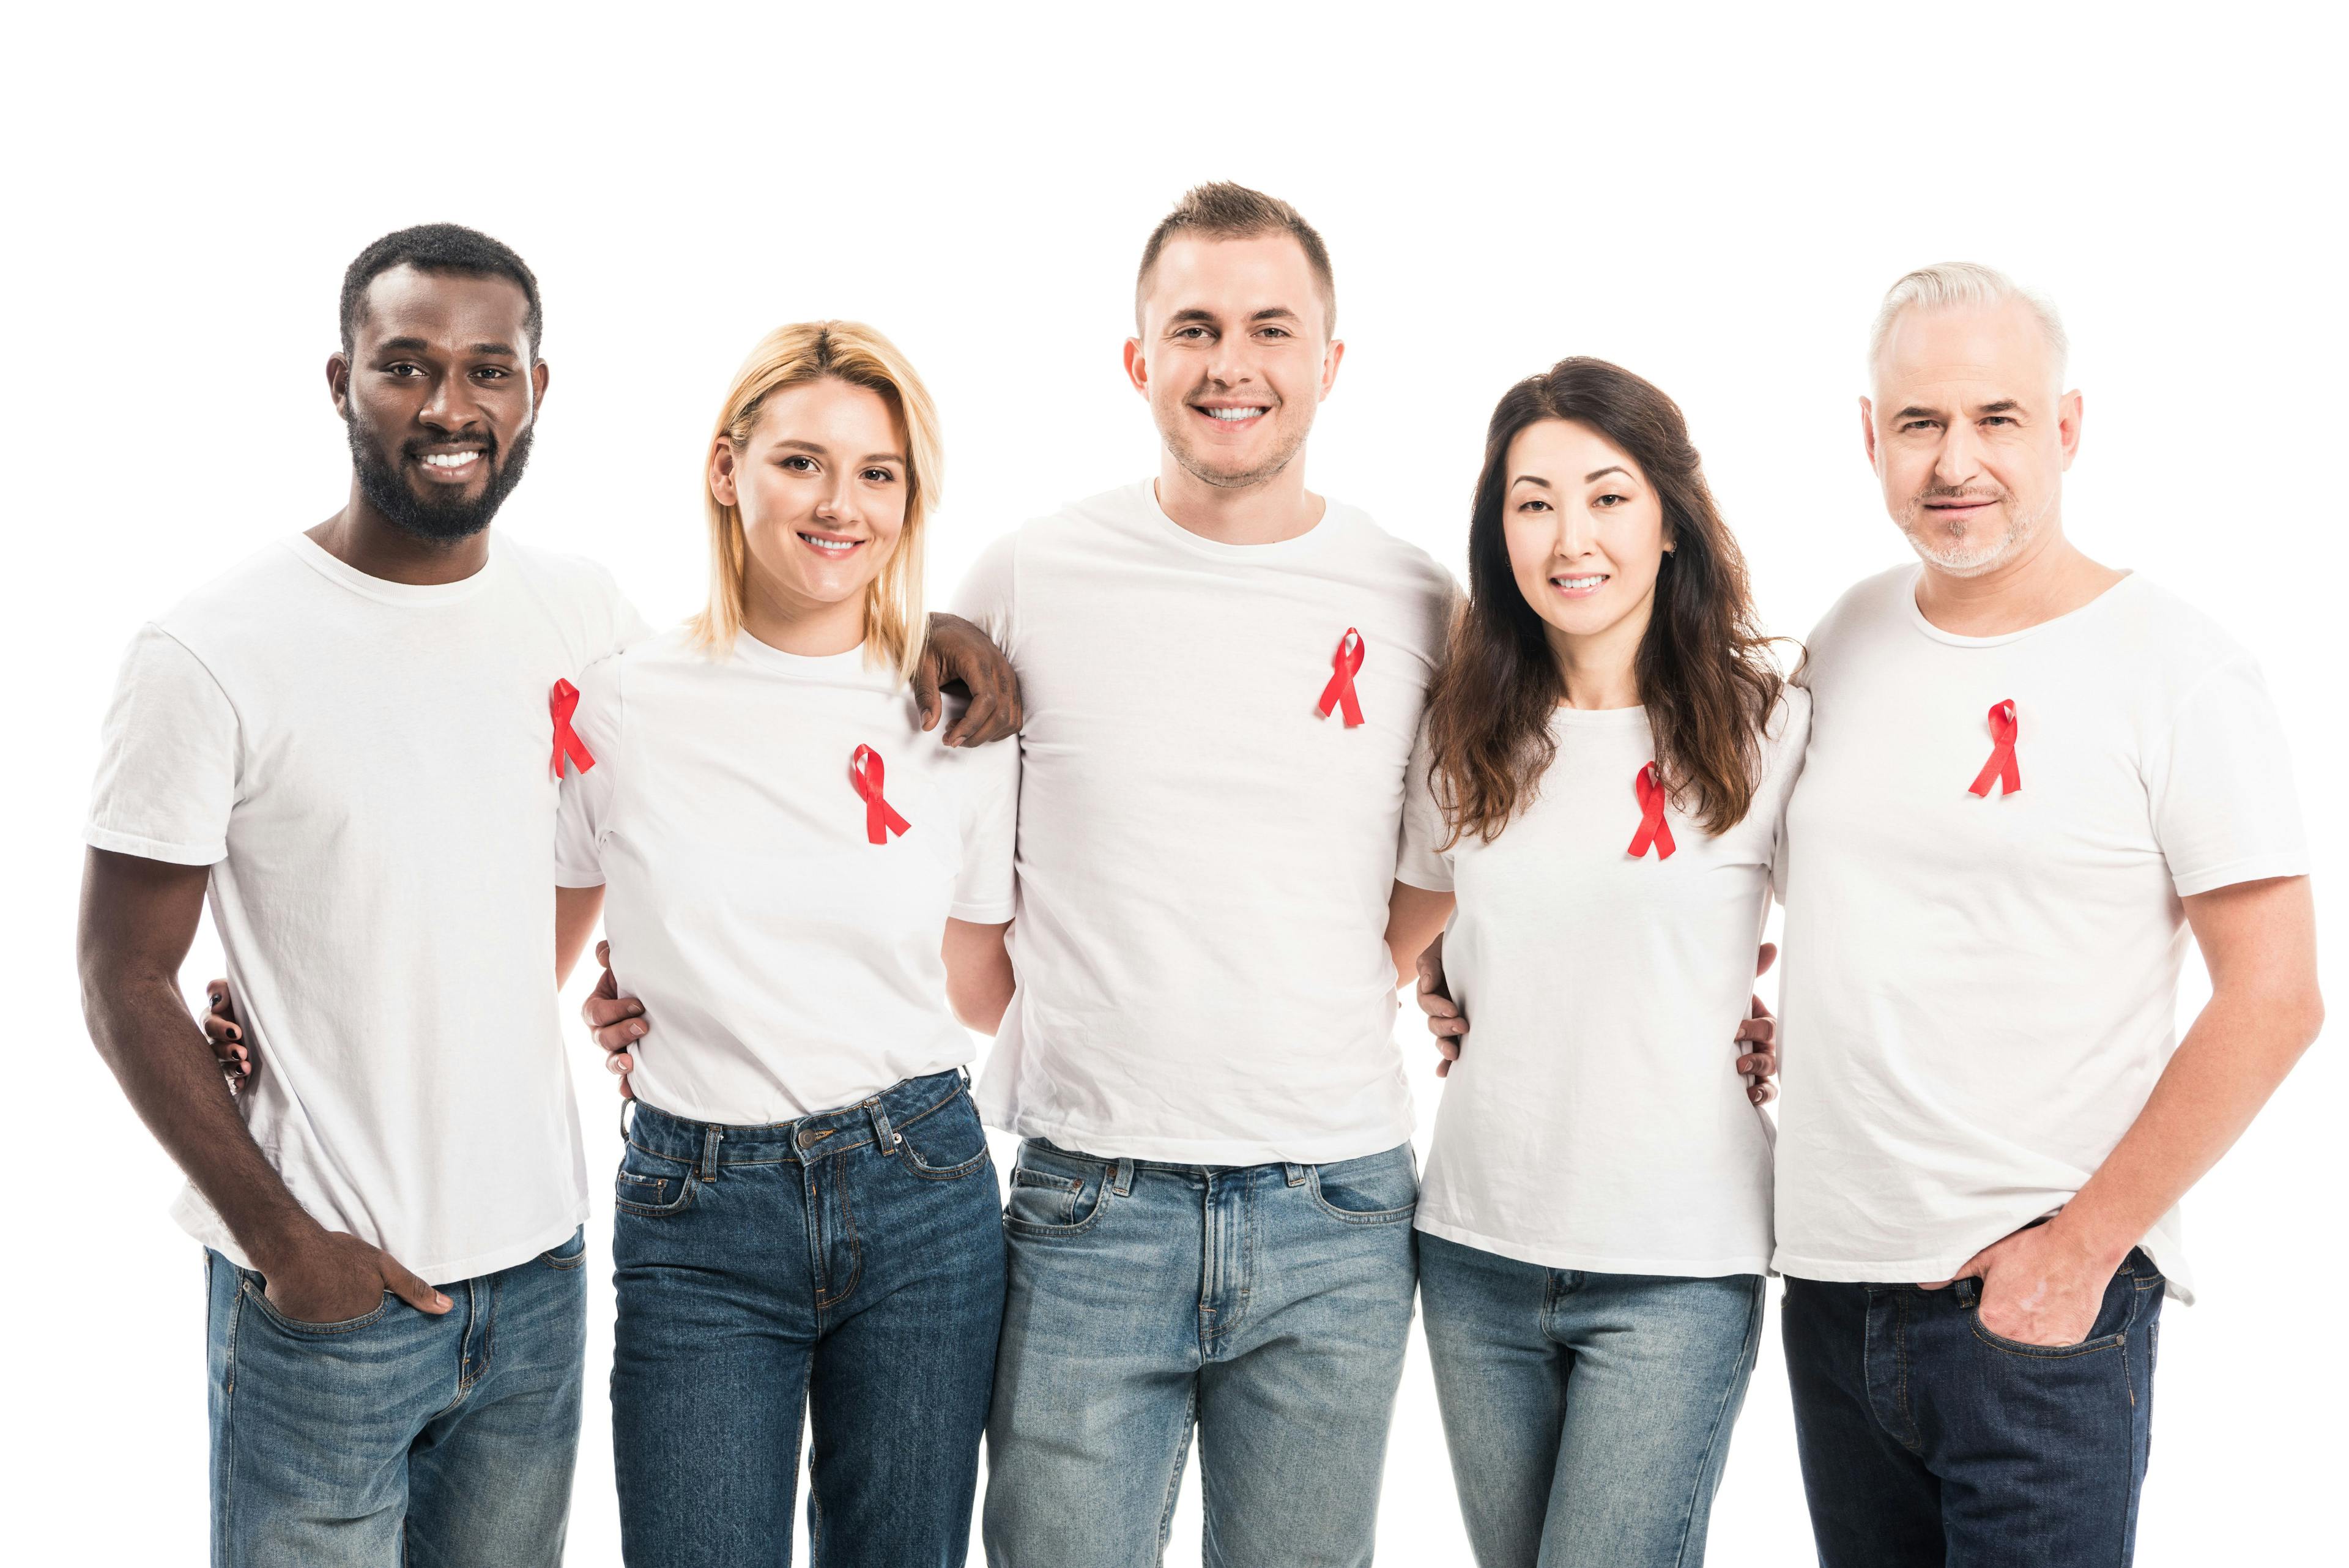 group of 5 people standing, wearing white shirts and red HIV ribbons